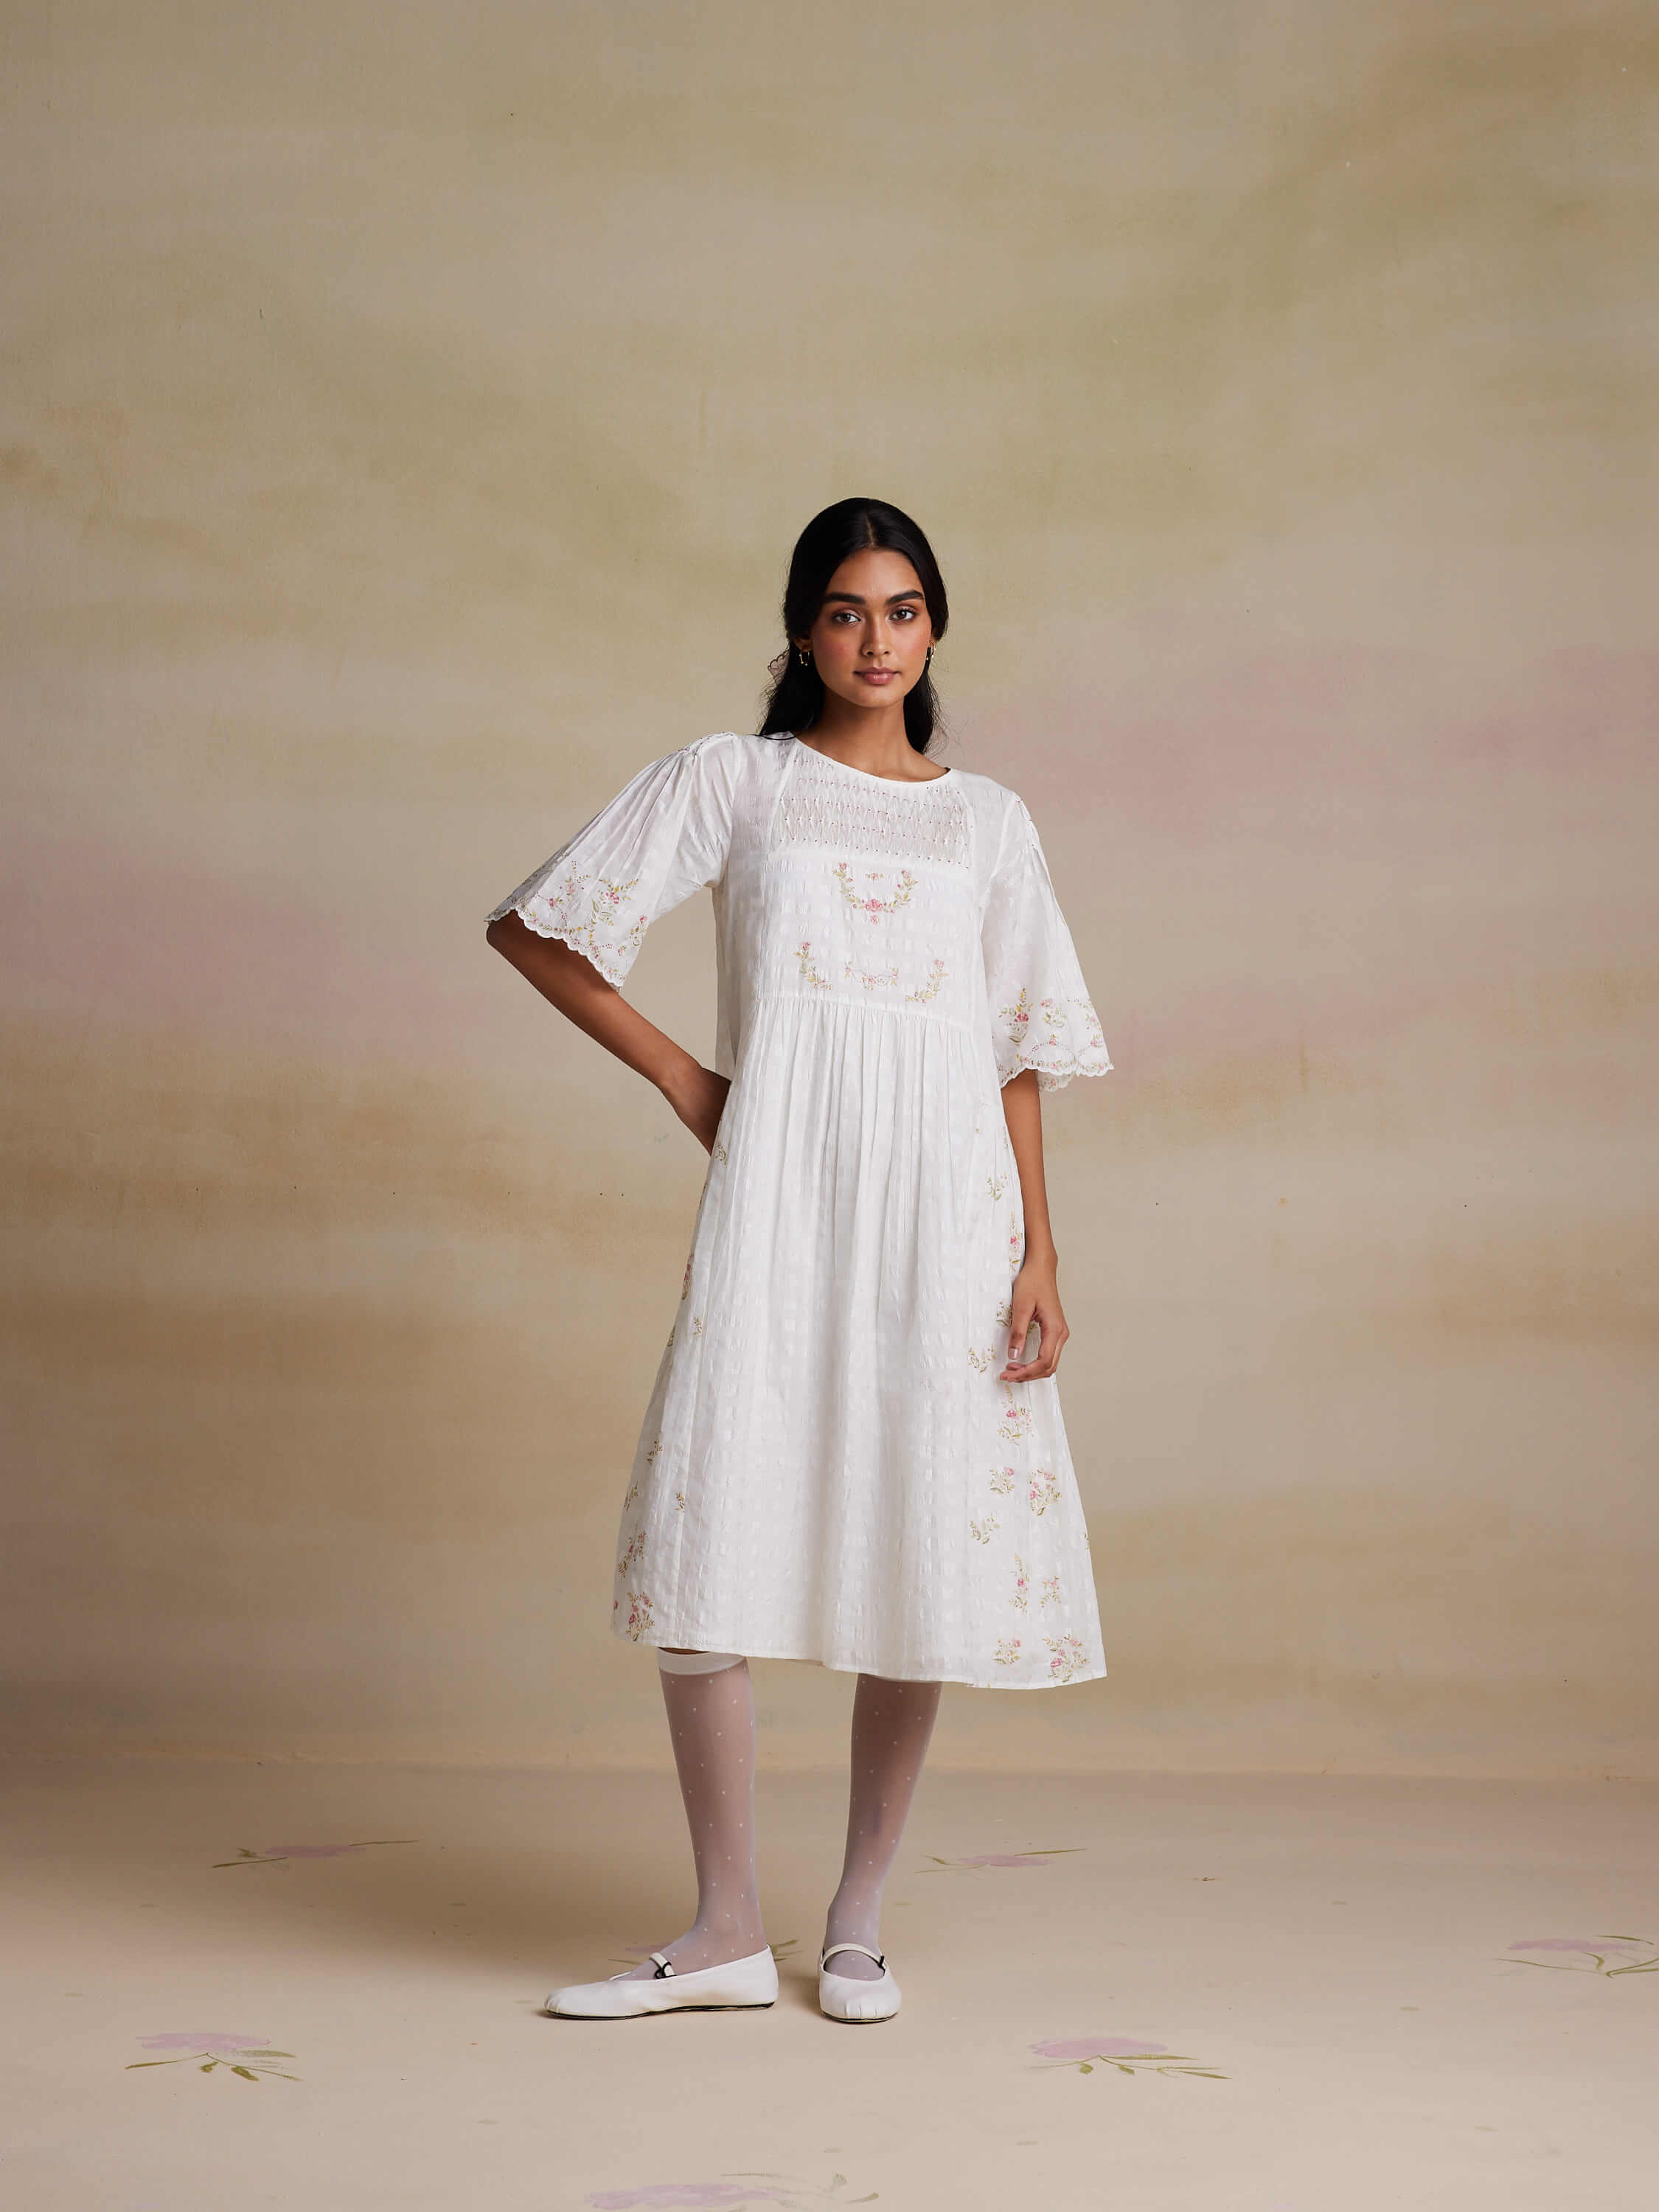 Woman in white dress with floral embroidery, posing against neutral background.